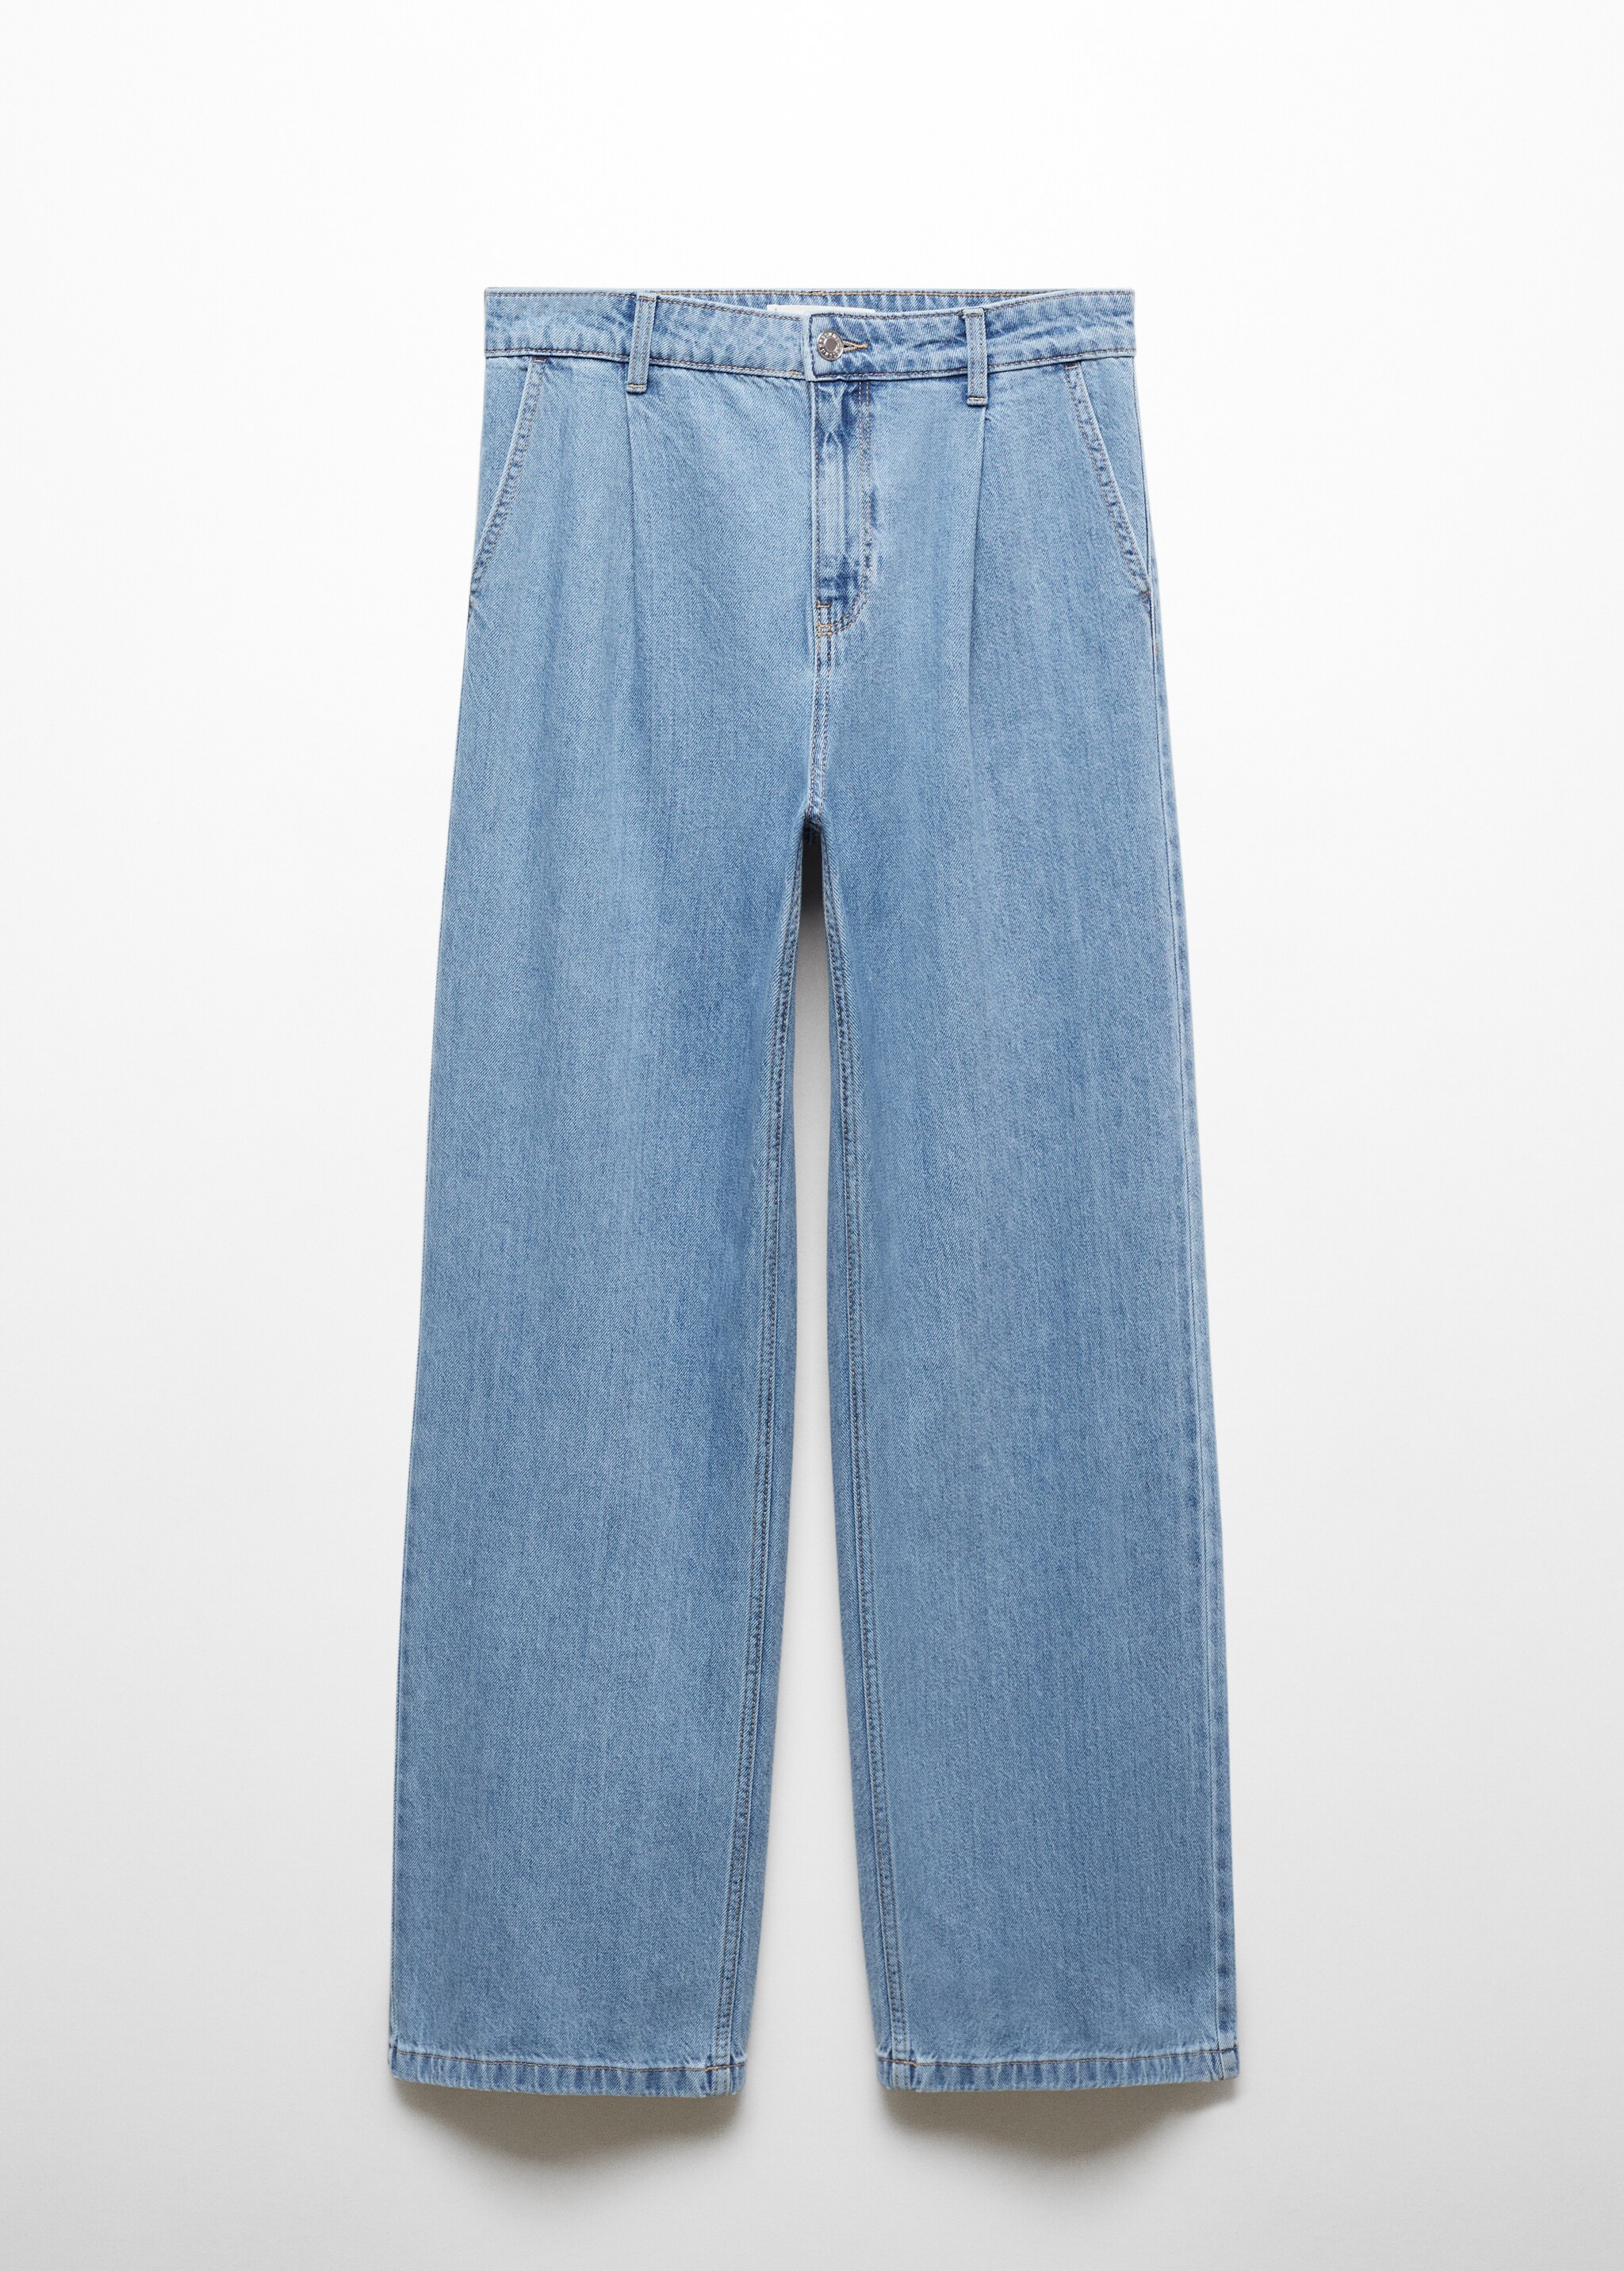 Straight pleated jeans - Article without model